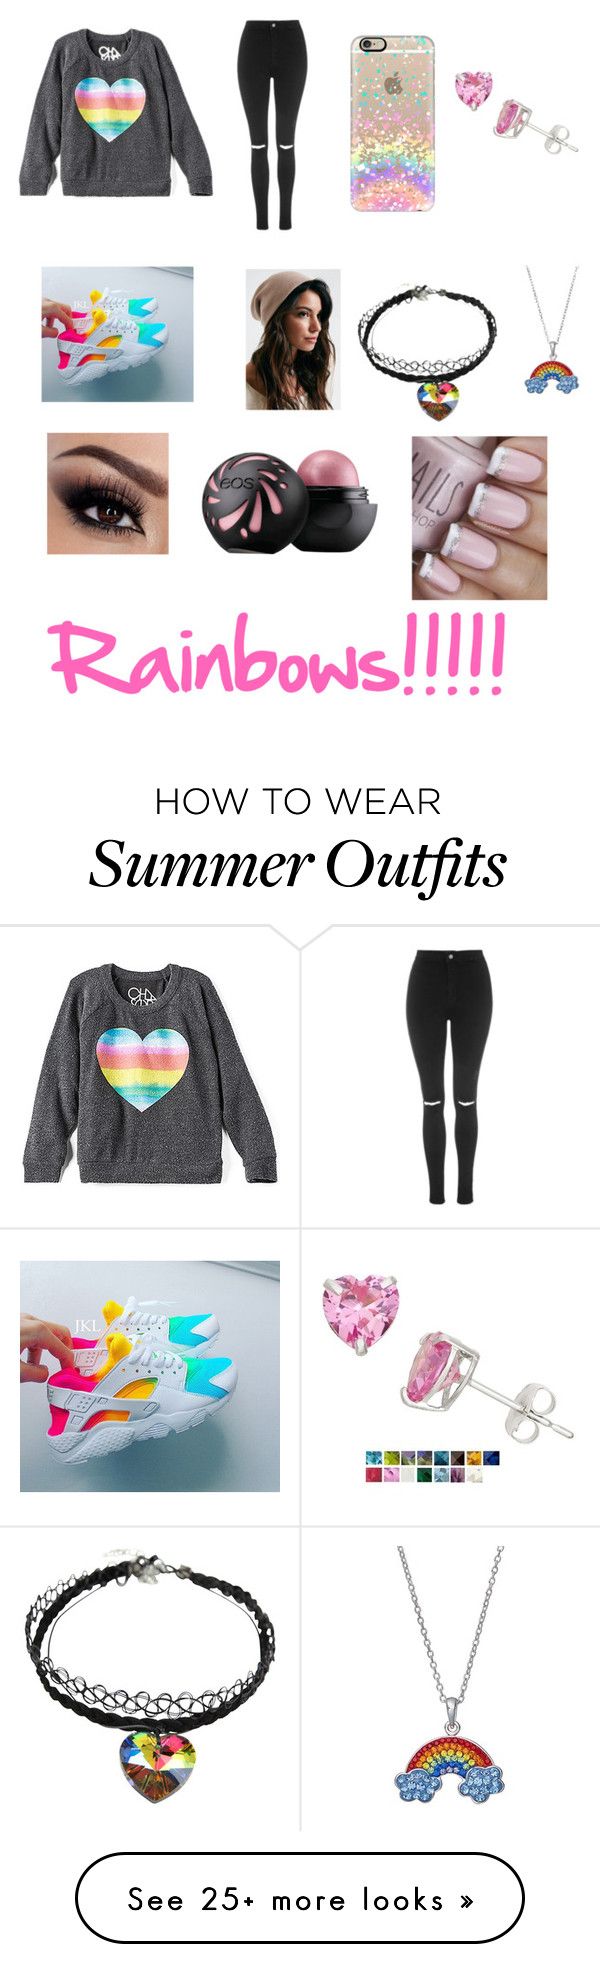 "Rainbow Outfit" by queensalma on Polyvore featuring Chaser, Topshop, ...